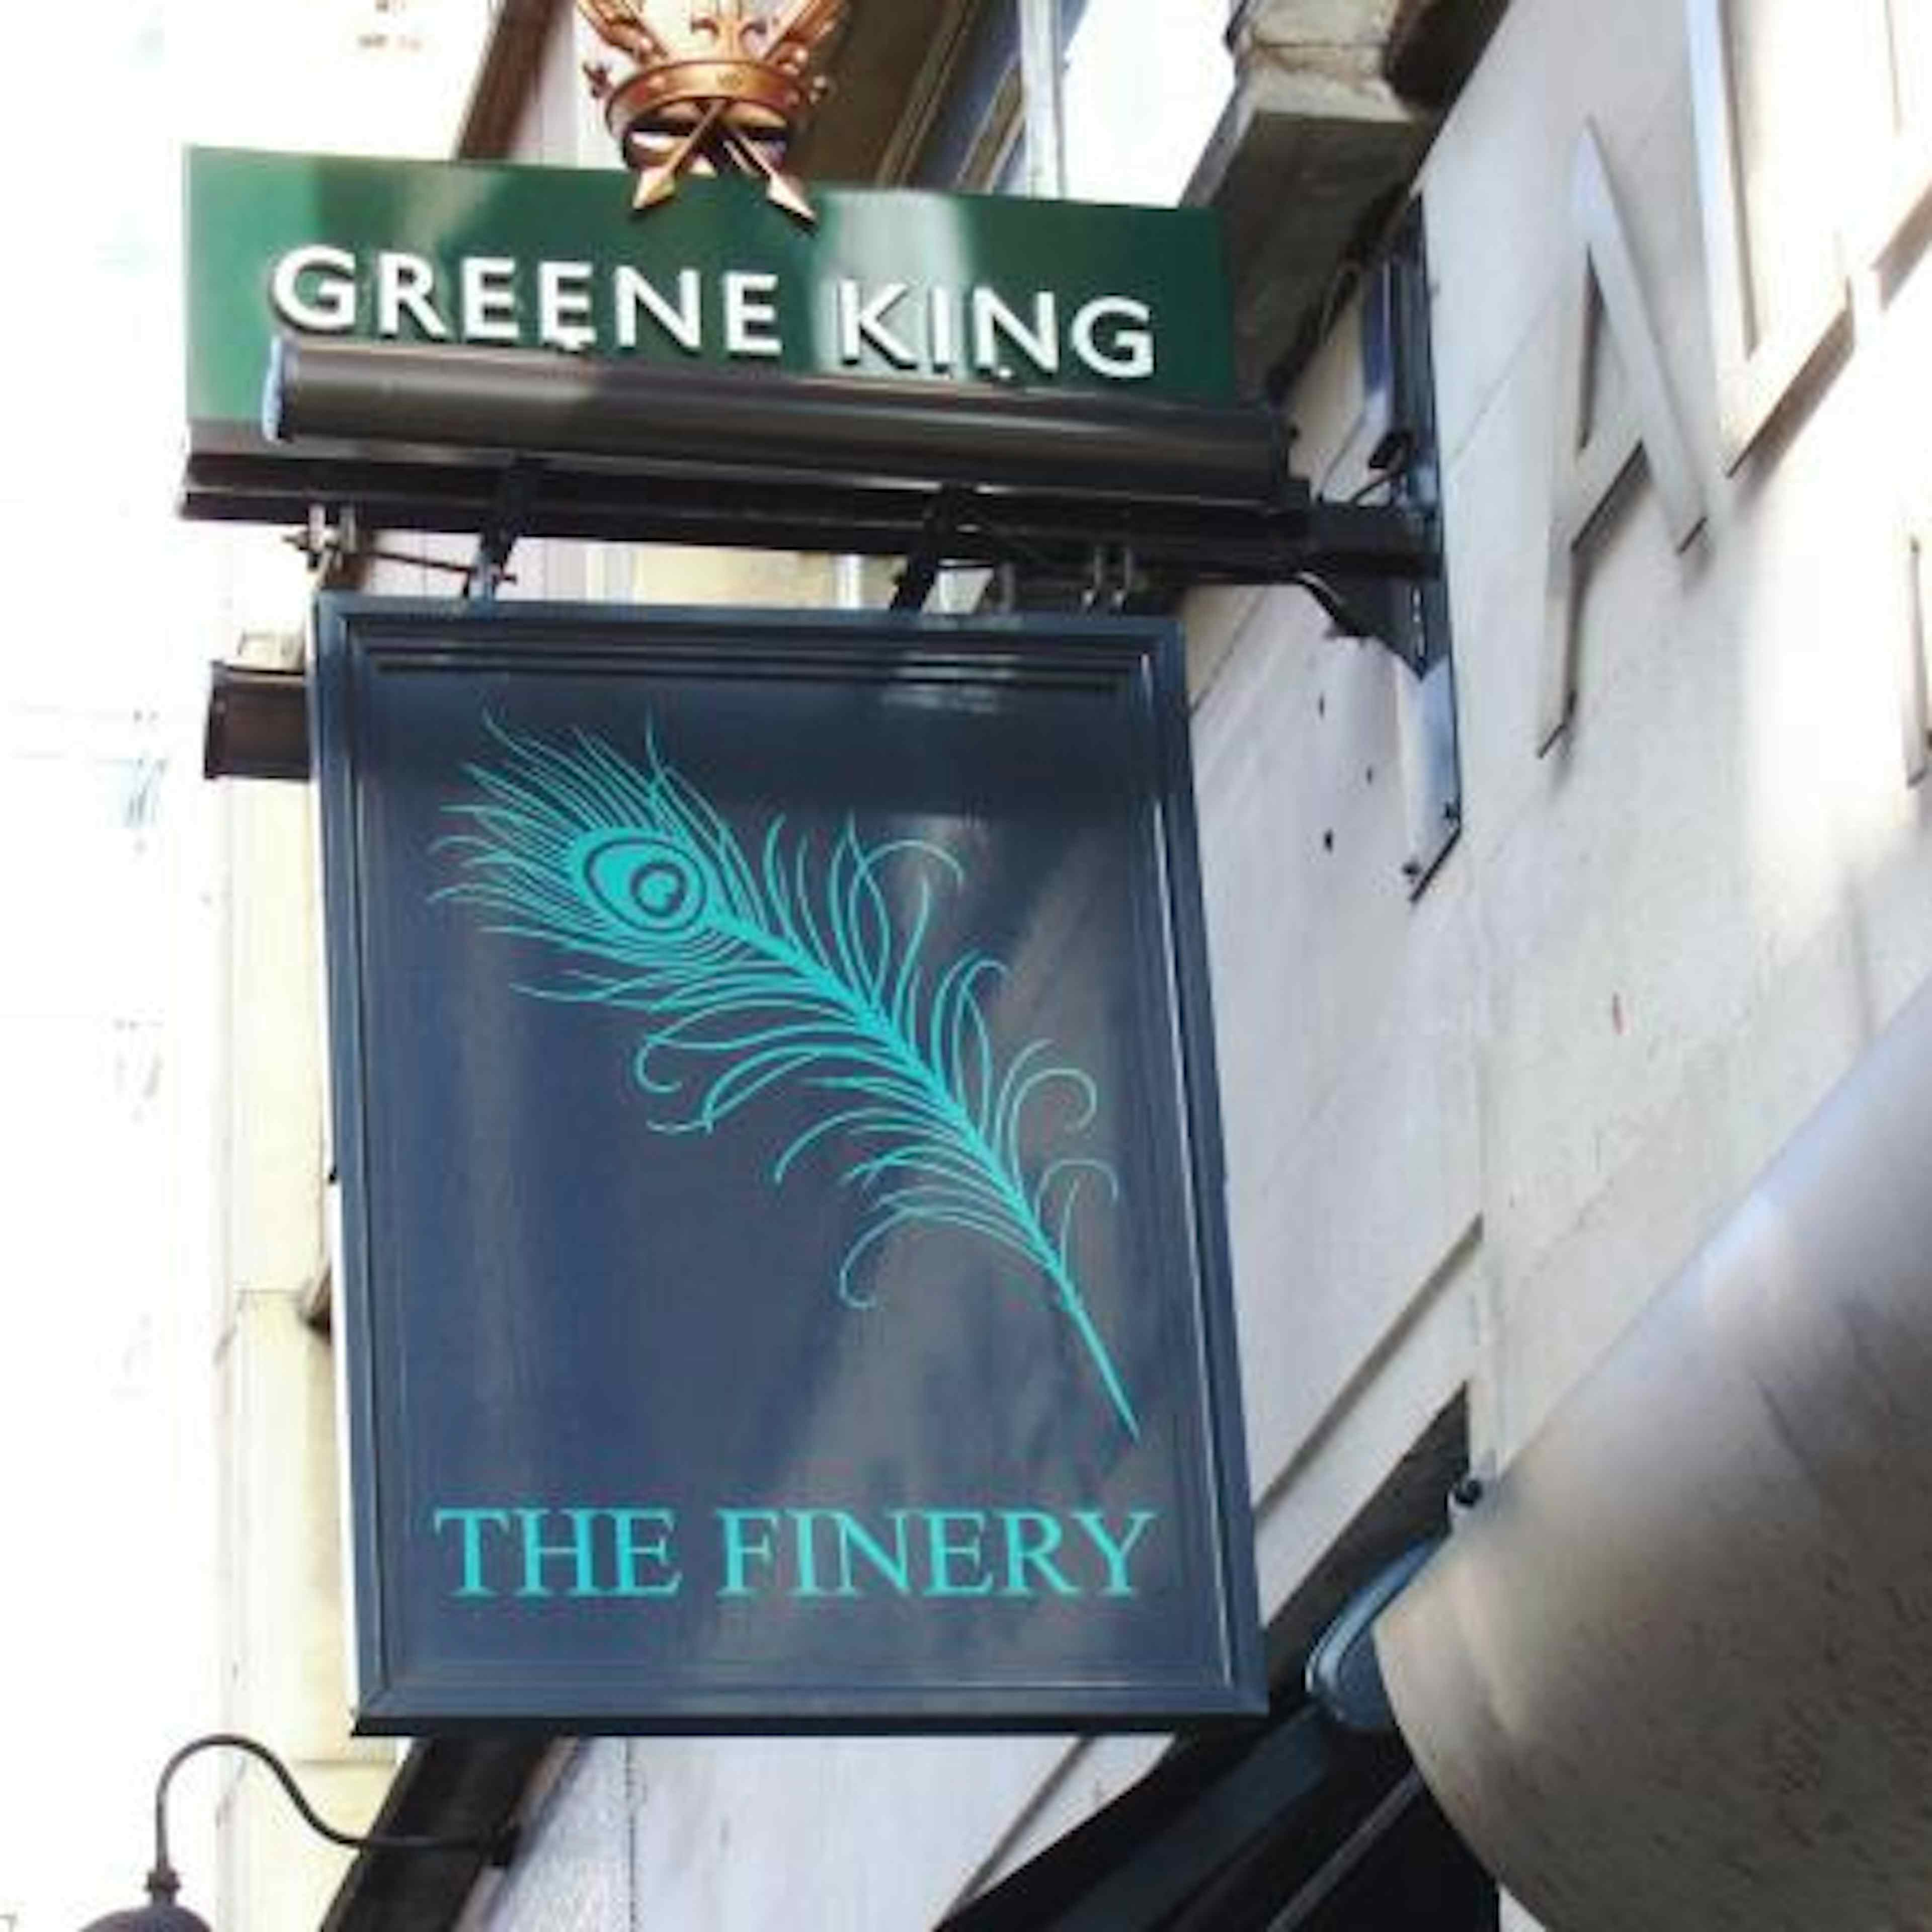 Greene King - The Finery - Mengarie image 3